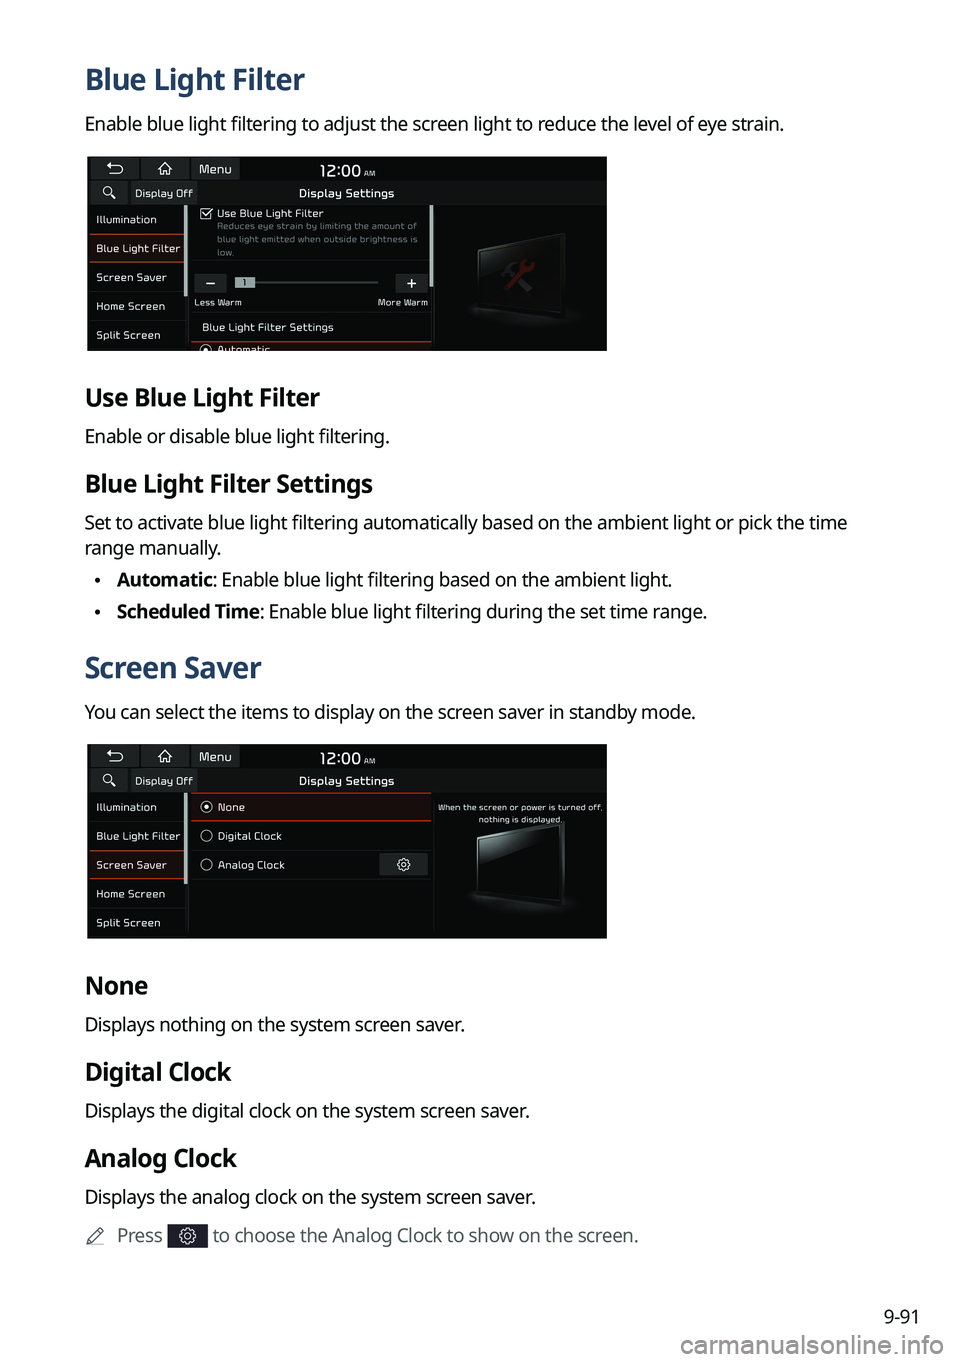 KIA SORENTO PHEV 2022  Navigation System Quick Reference Guide 9-91
Blue Light Filter
Enable blue light filtering to adjust the screen light to reduce the level of eye strain.
Use Blue Light Filter
Enable or disable blue light filtering.
Blue Light Filter Setting